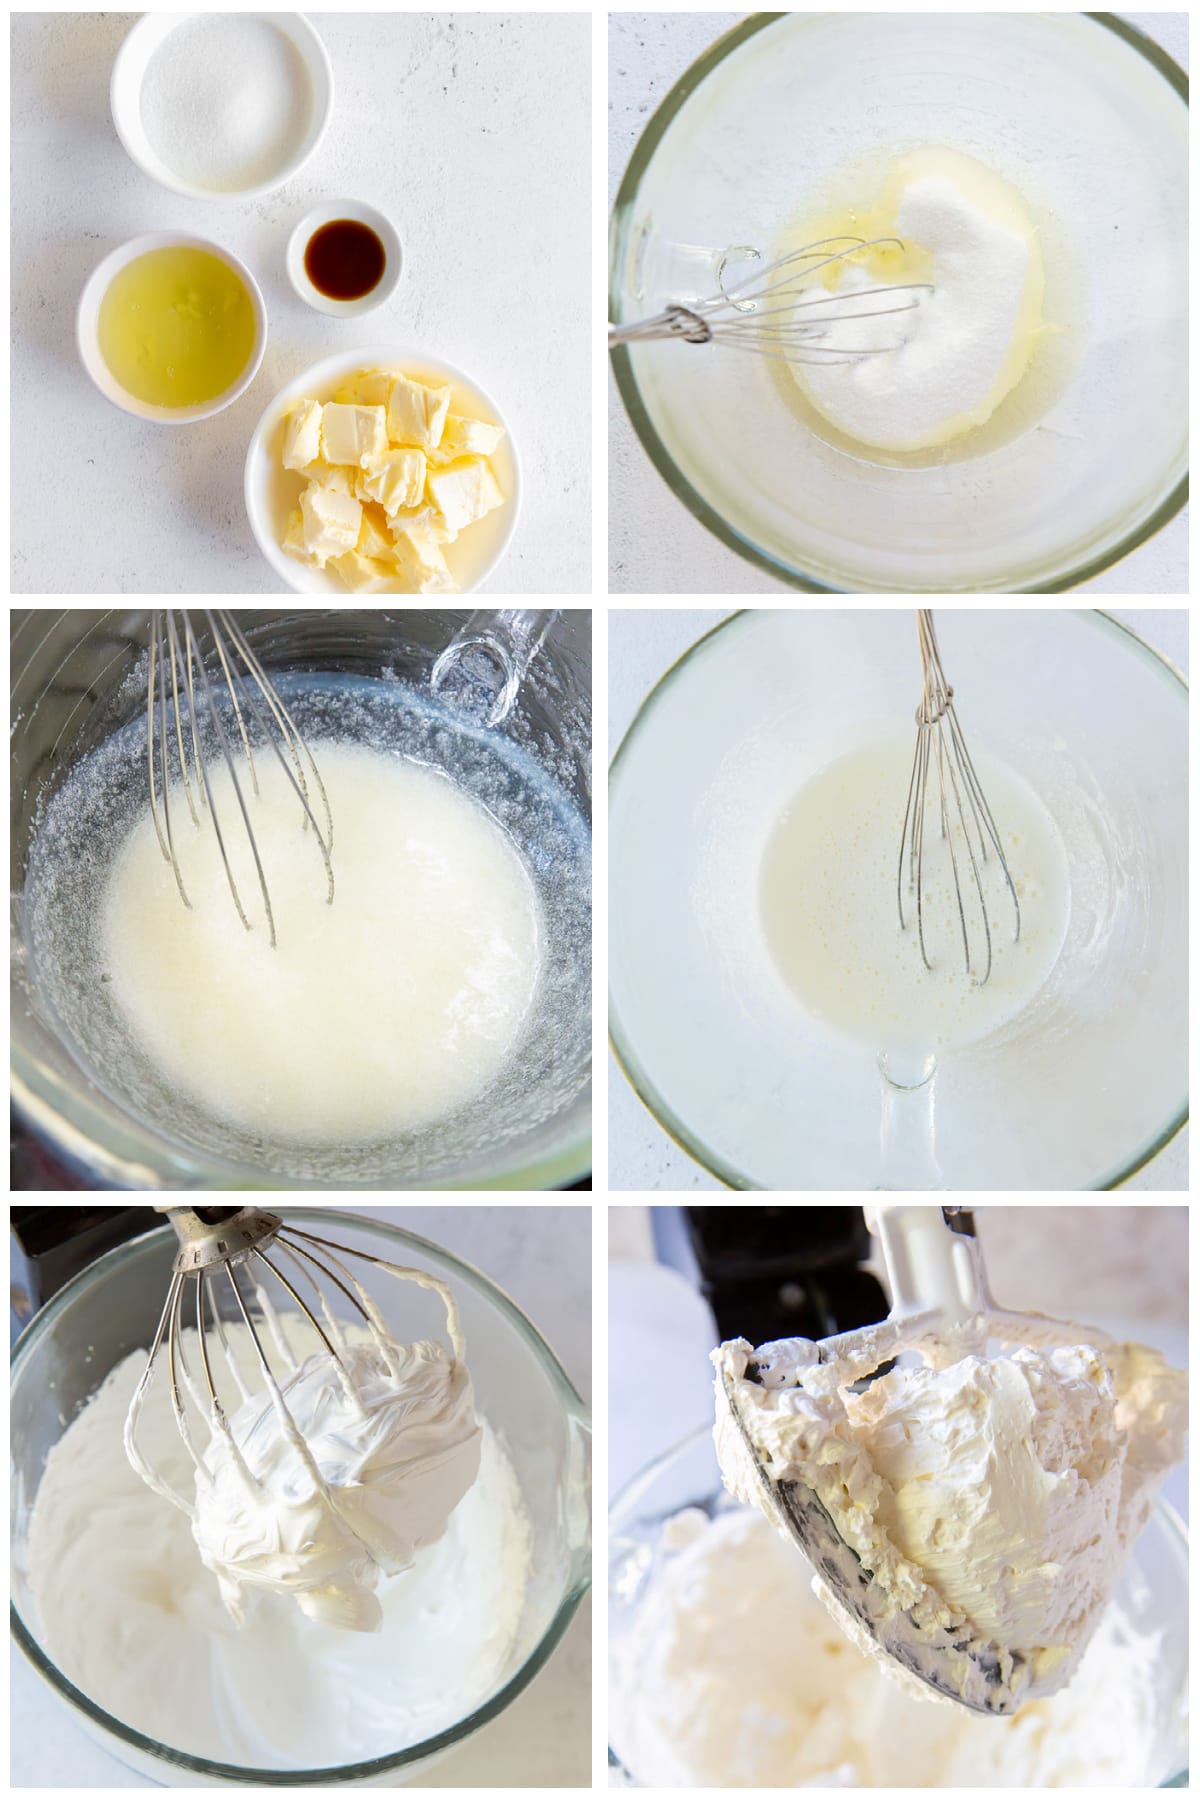 photo collage demonstrating how to make swiss meringue buttercream